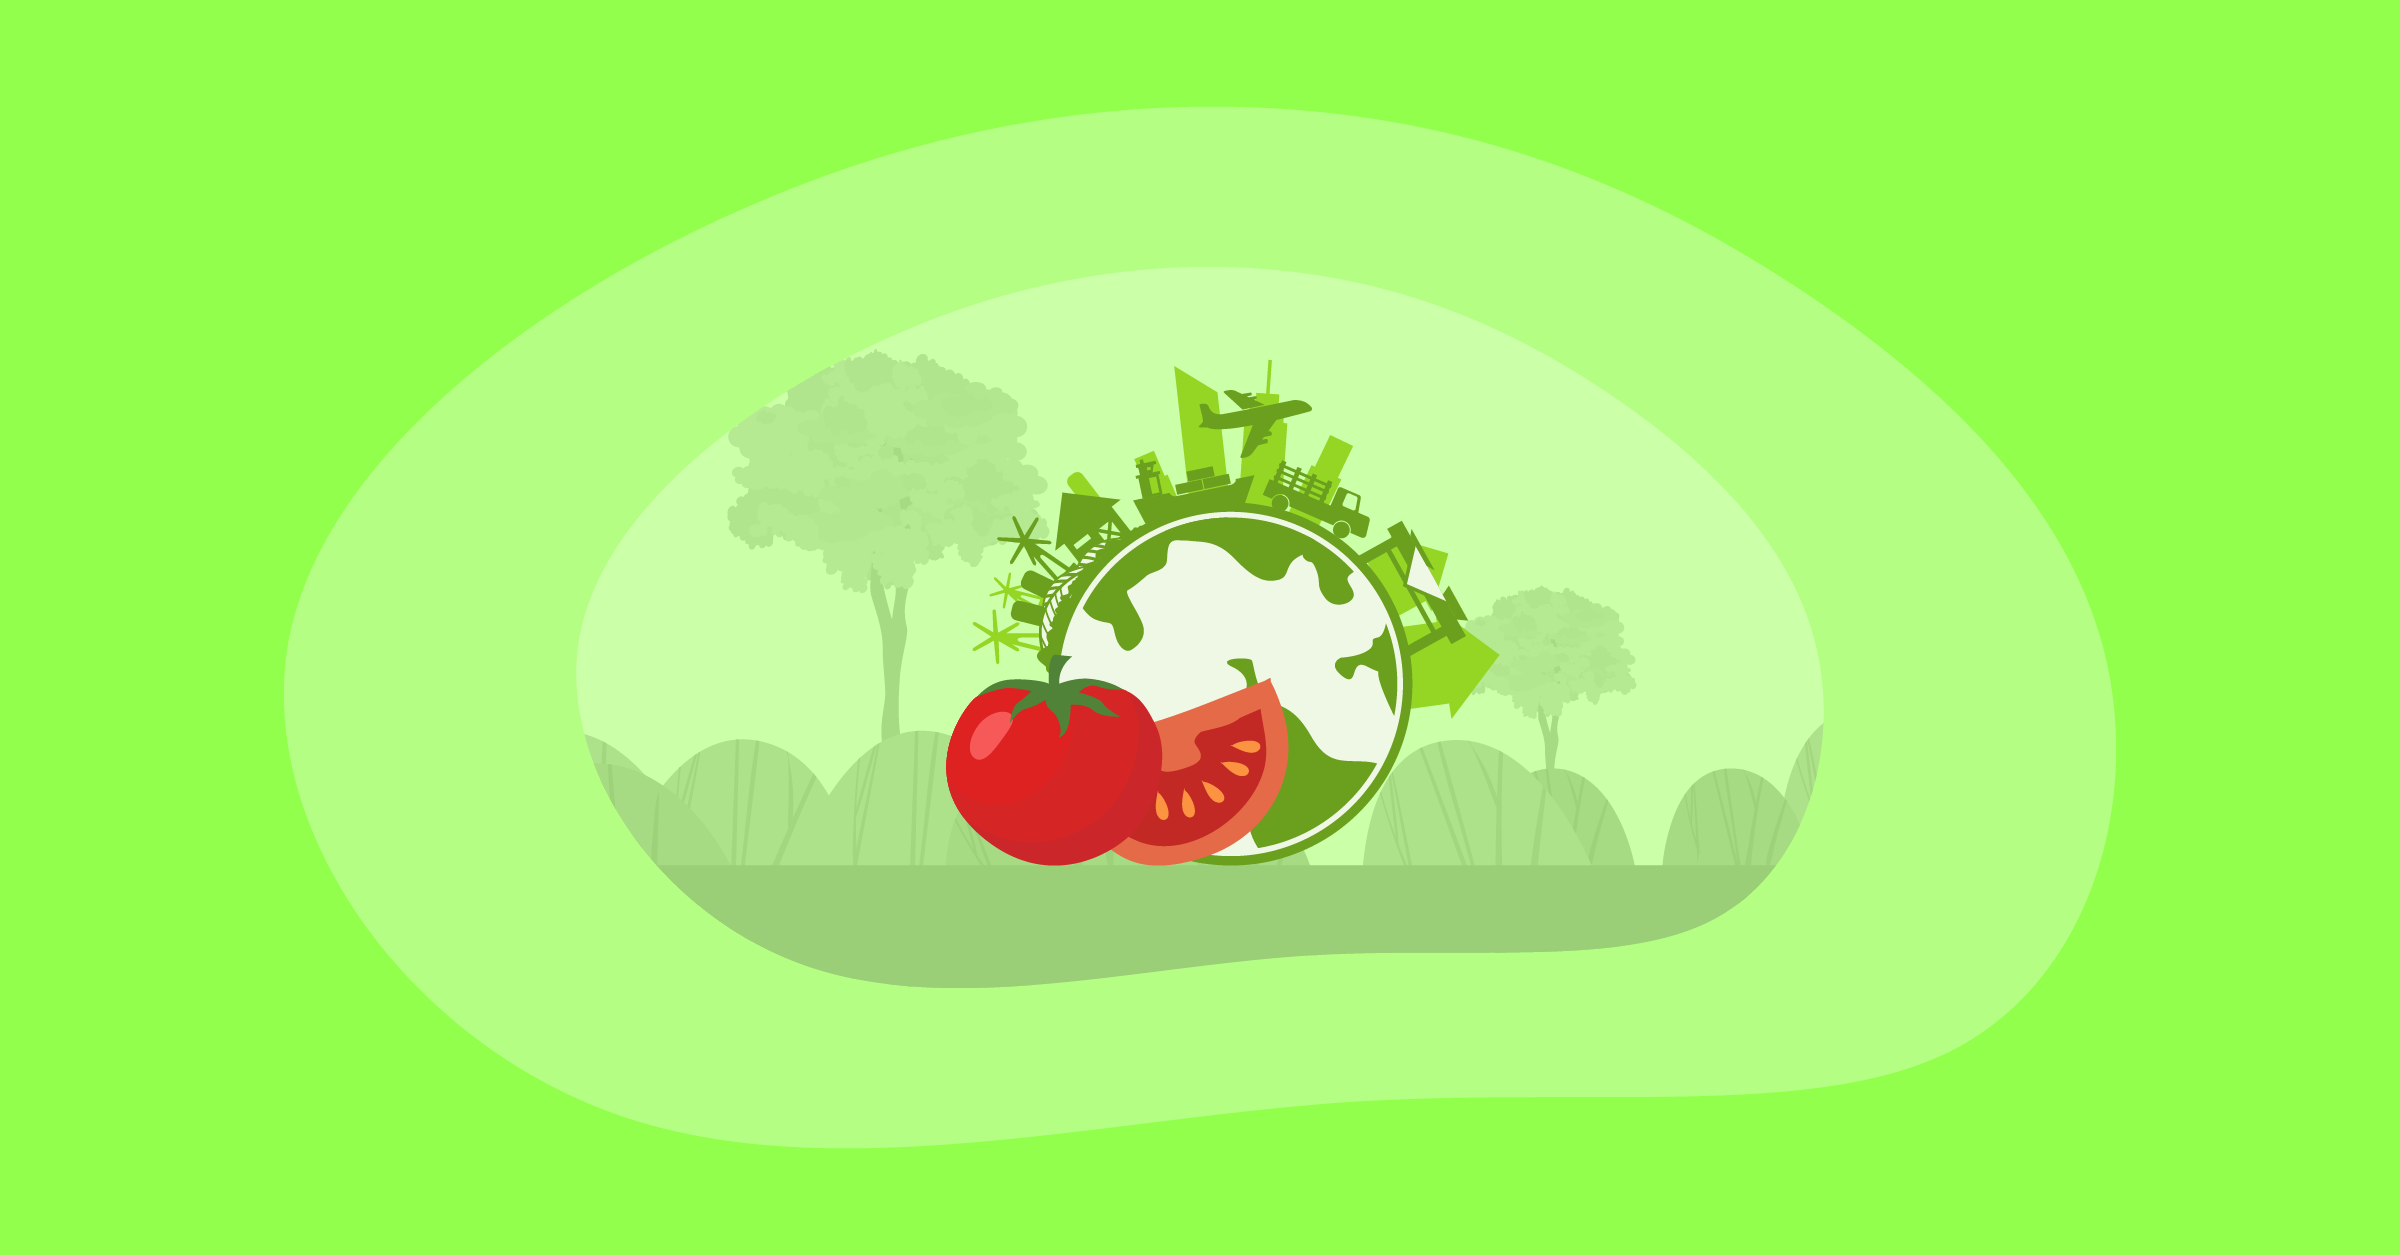 Illustration of tomatoes and its environmental impact